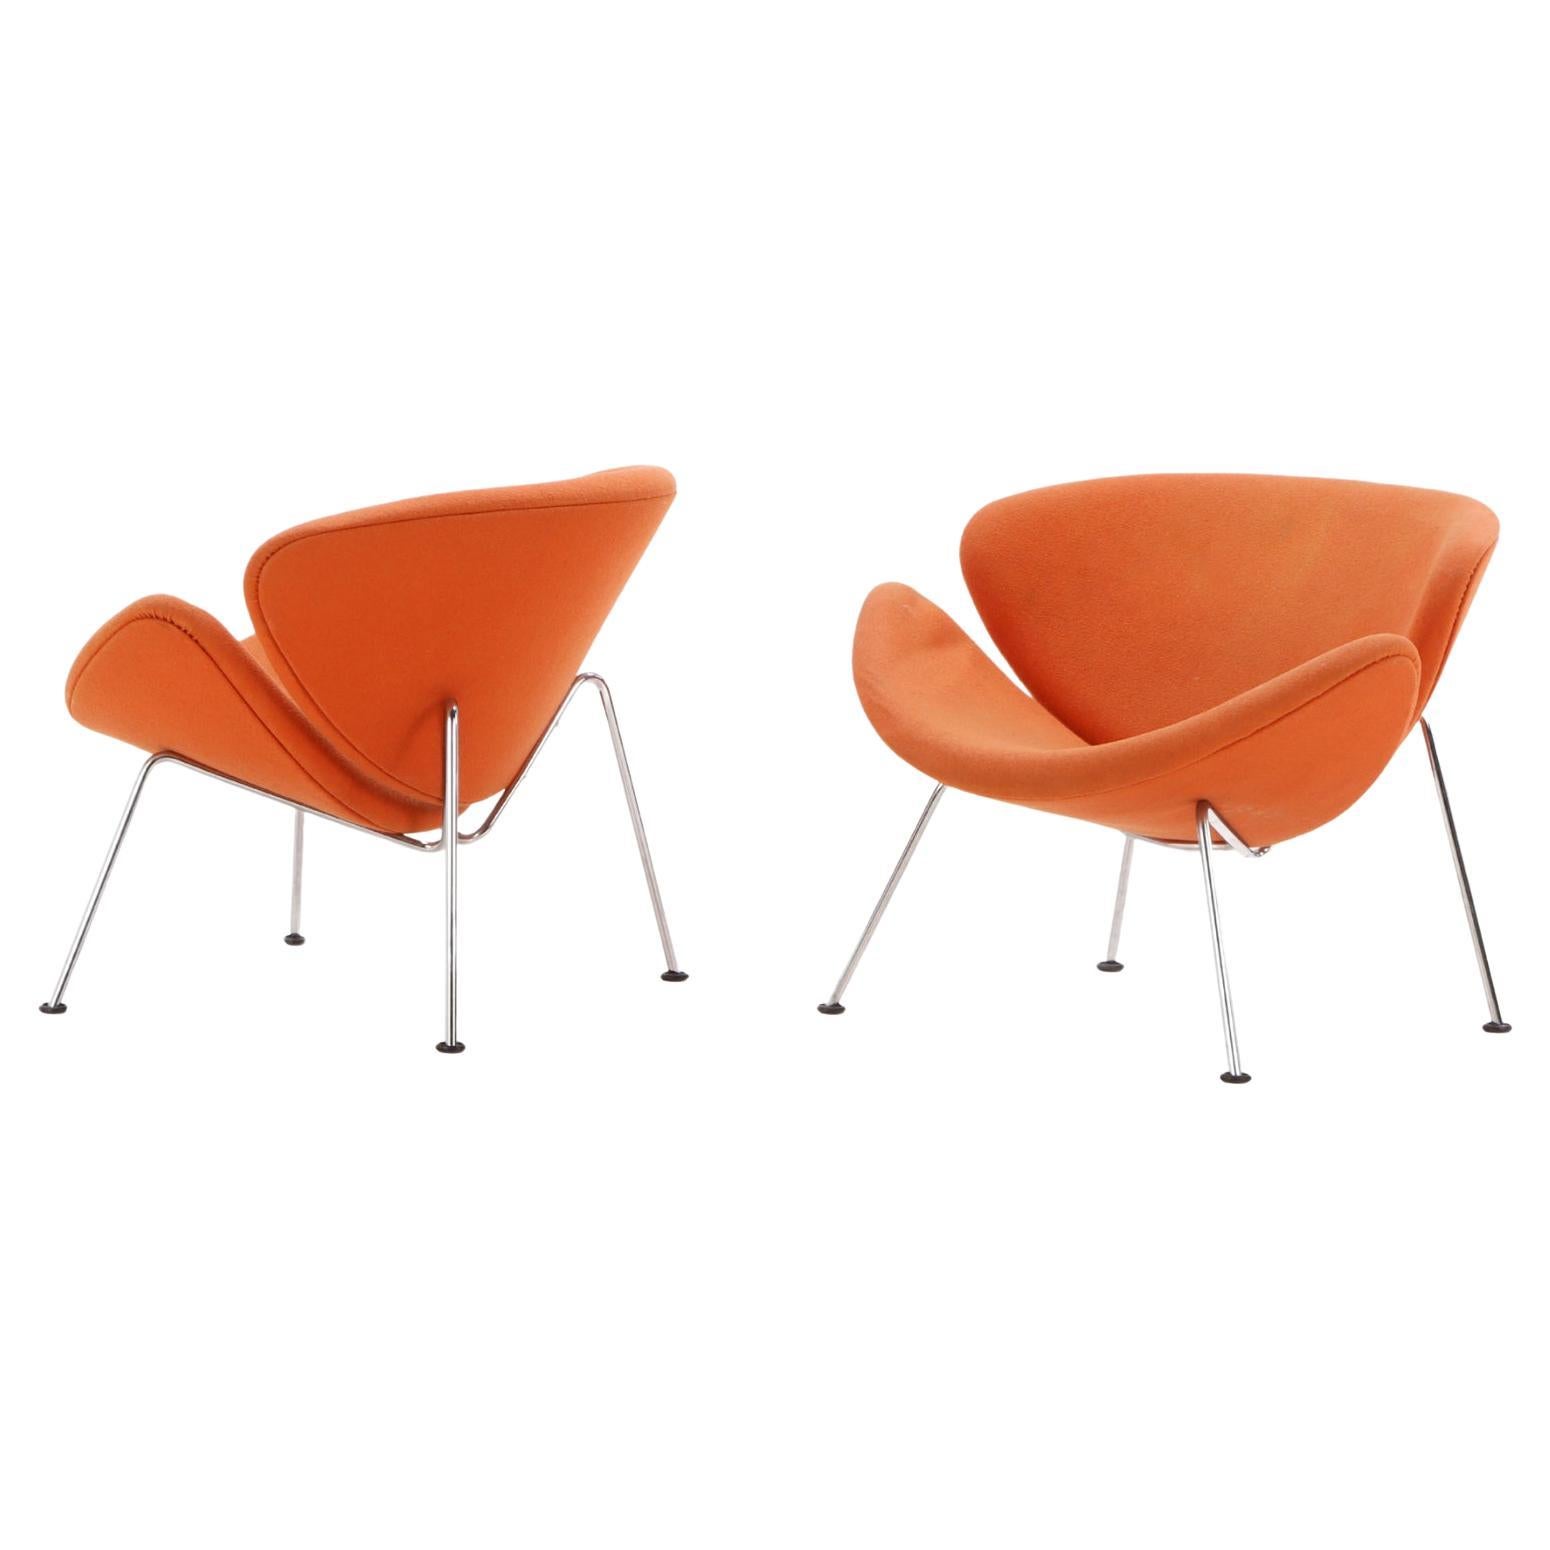 A pair of upholstered Pierre Paulin style upholstered chrome orange slice chairs For Sale